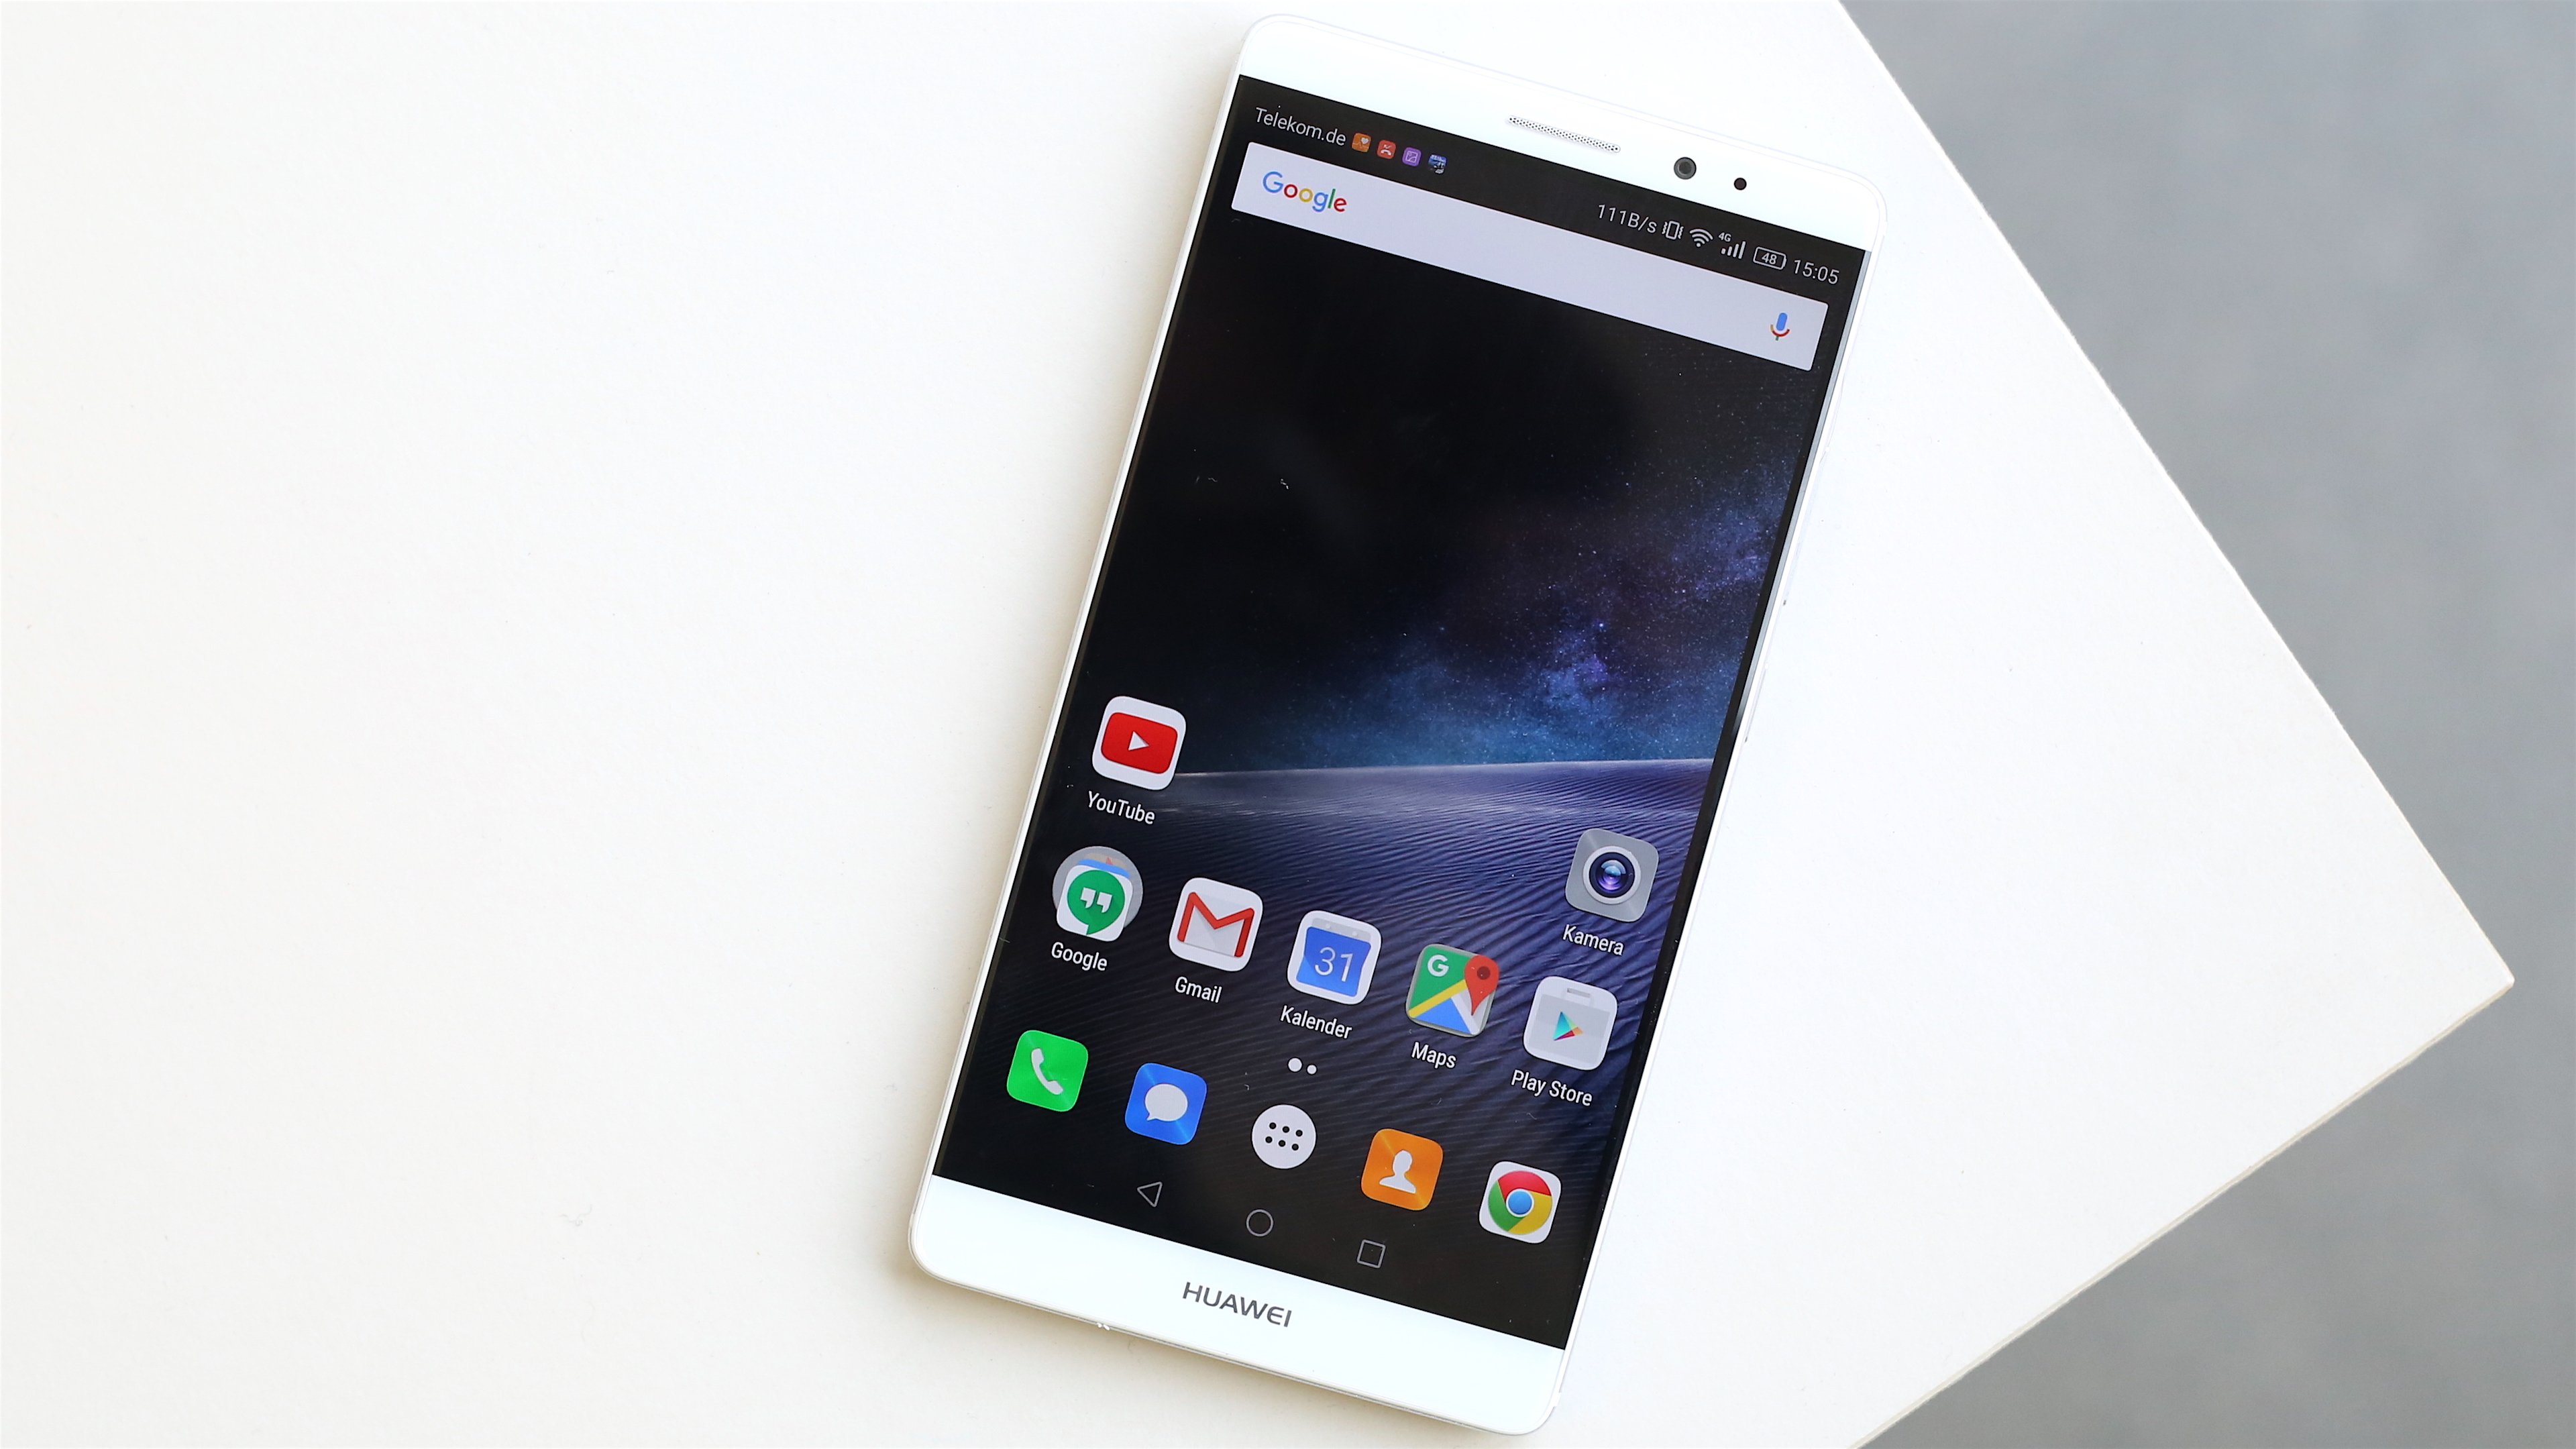 tarwe Rusland krater Huawei Mate 8 review: the almost-perfect phablet | NextPit